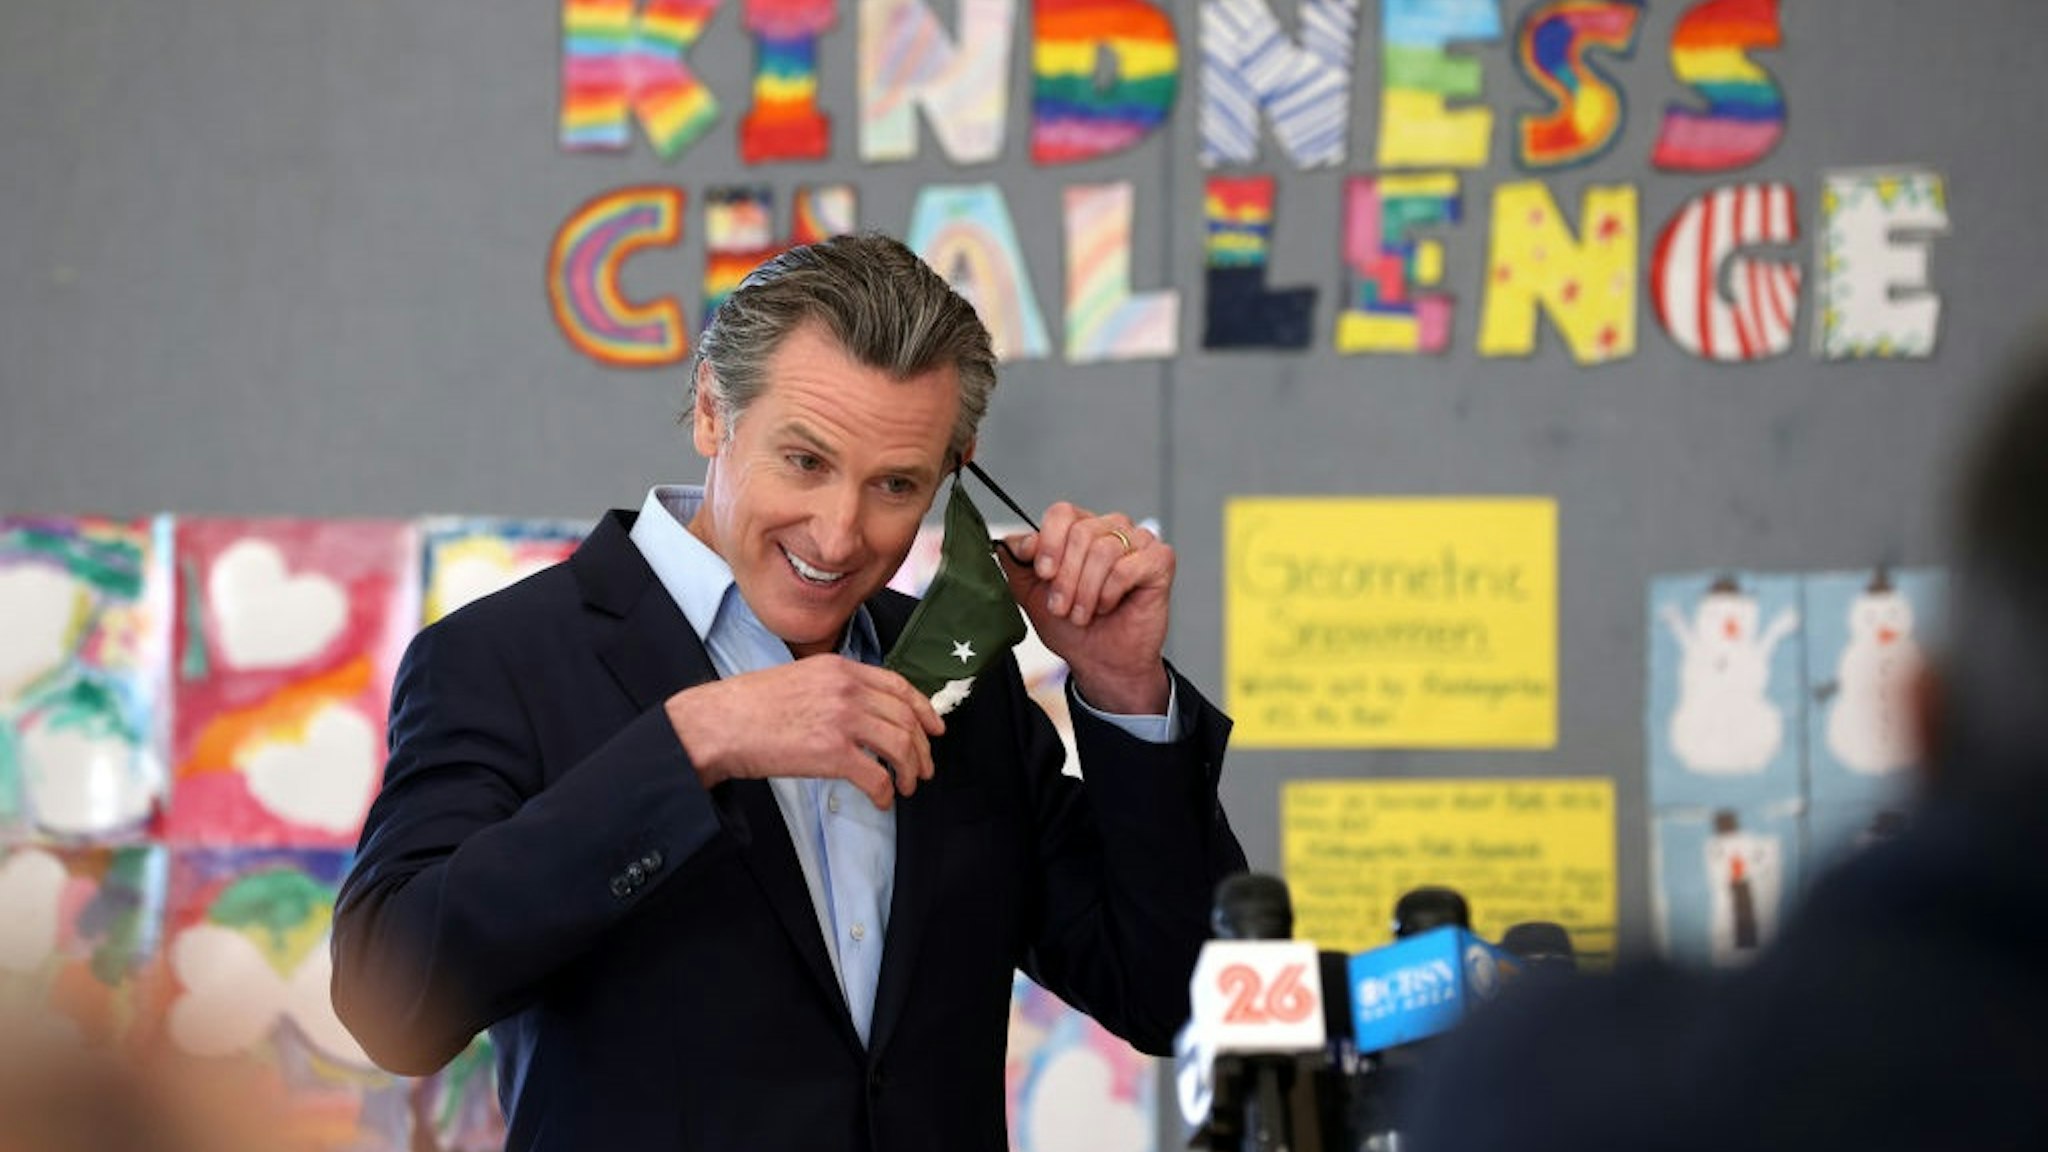 ALAMEDA, CALIFORNIA - MARCH 16: California Gov. Gavin Newsom removes his mask before speaking during a news conference after he toured the newly reopened Ruby Bridges Elementary School on March 16, 2021 in Alameda, California.